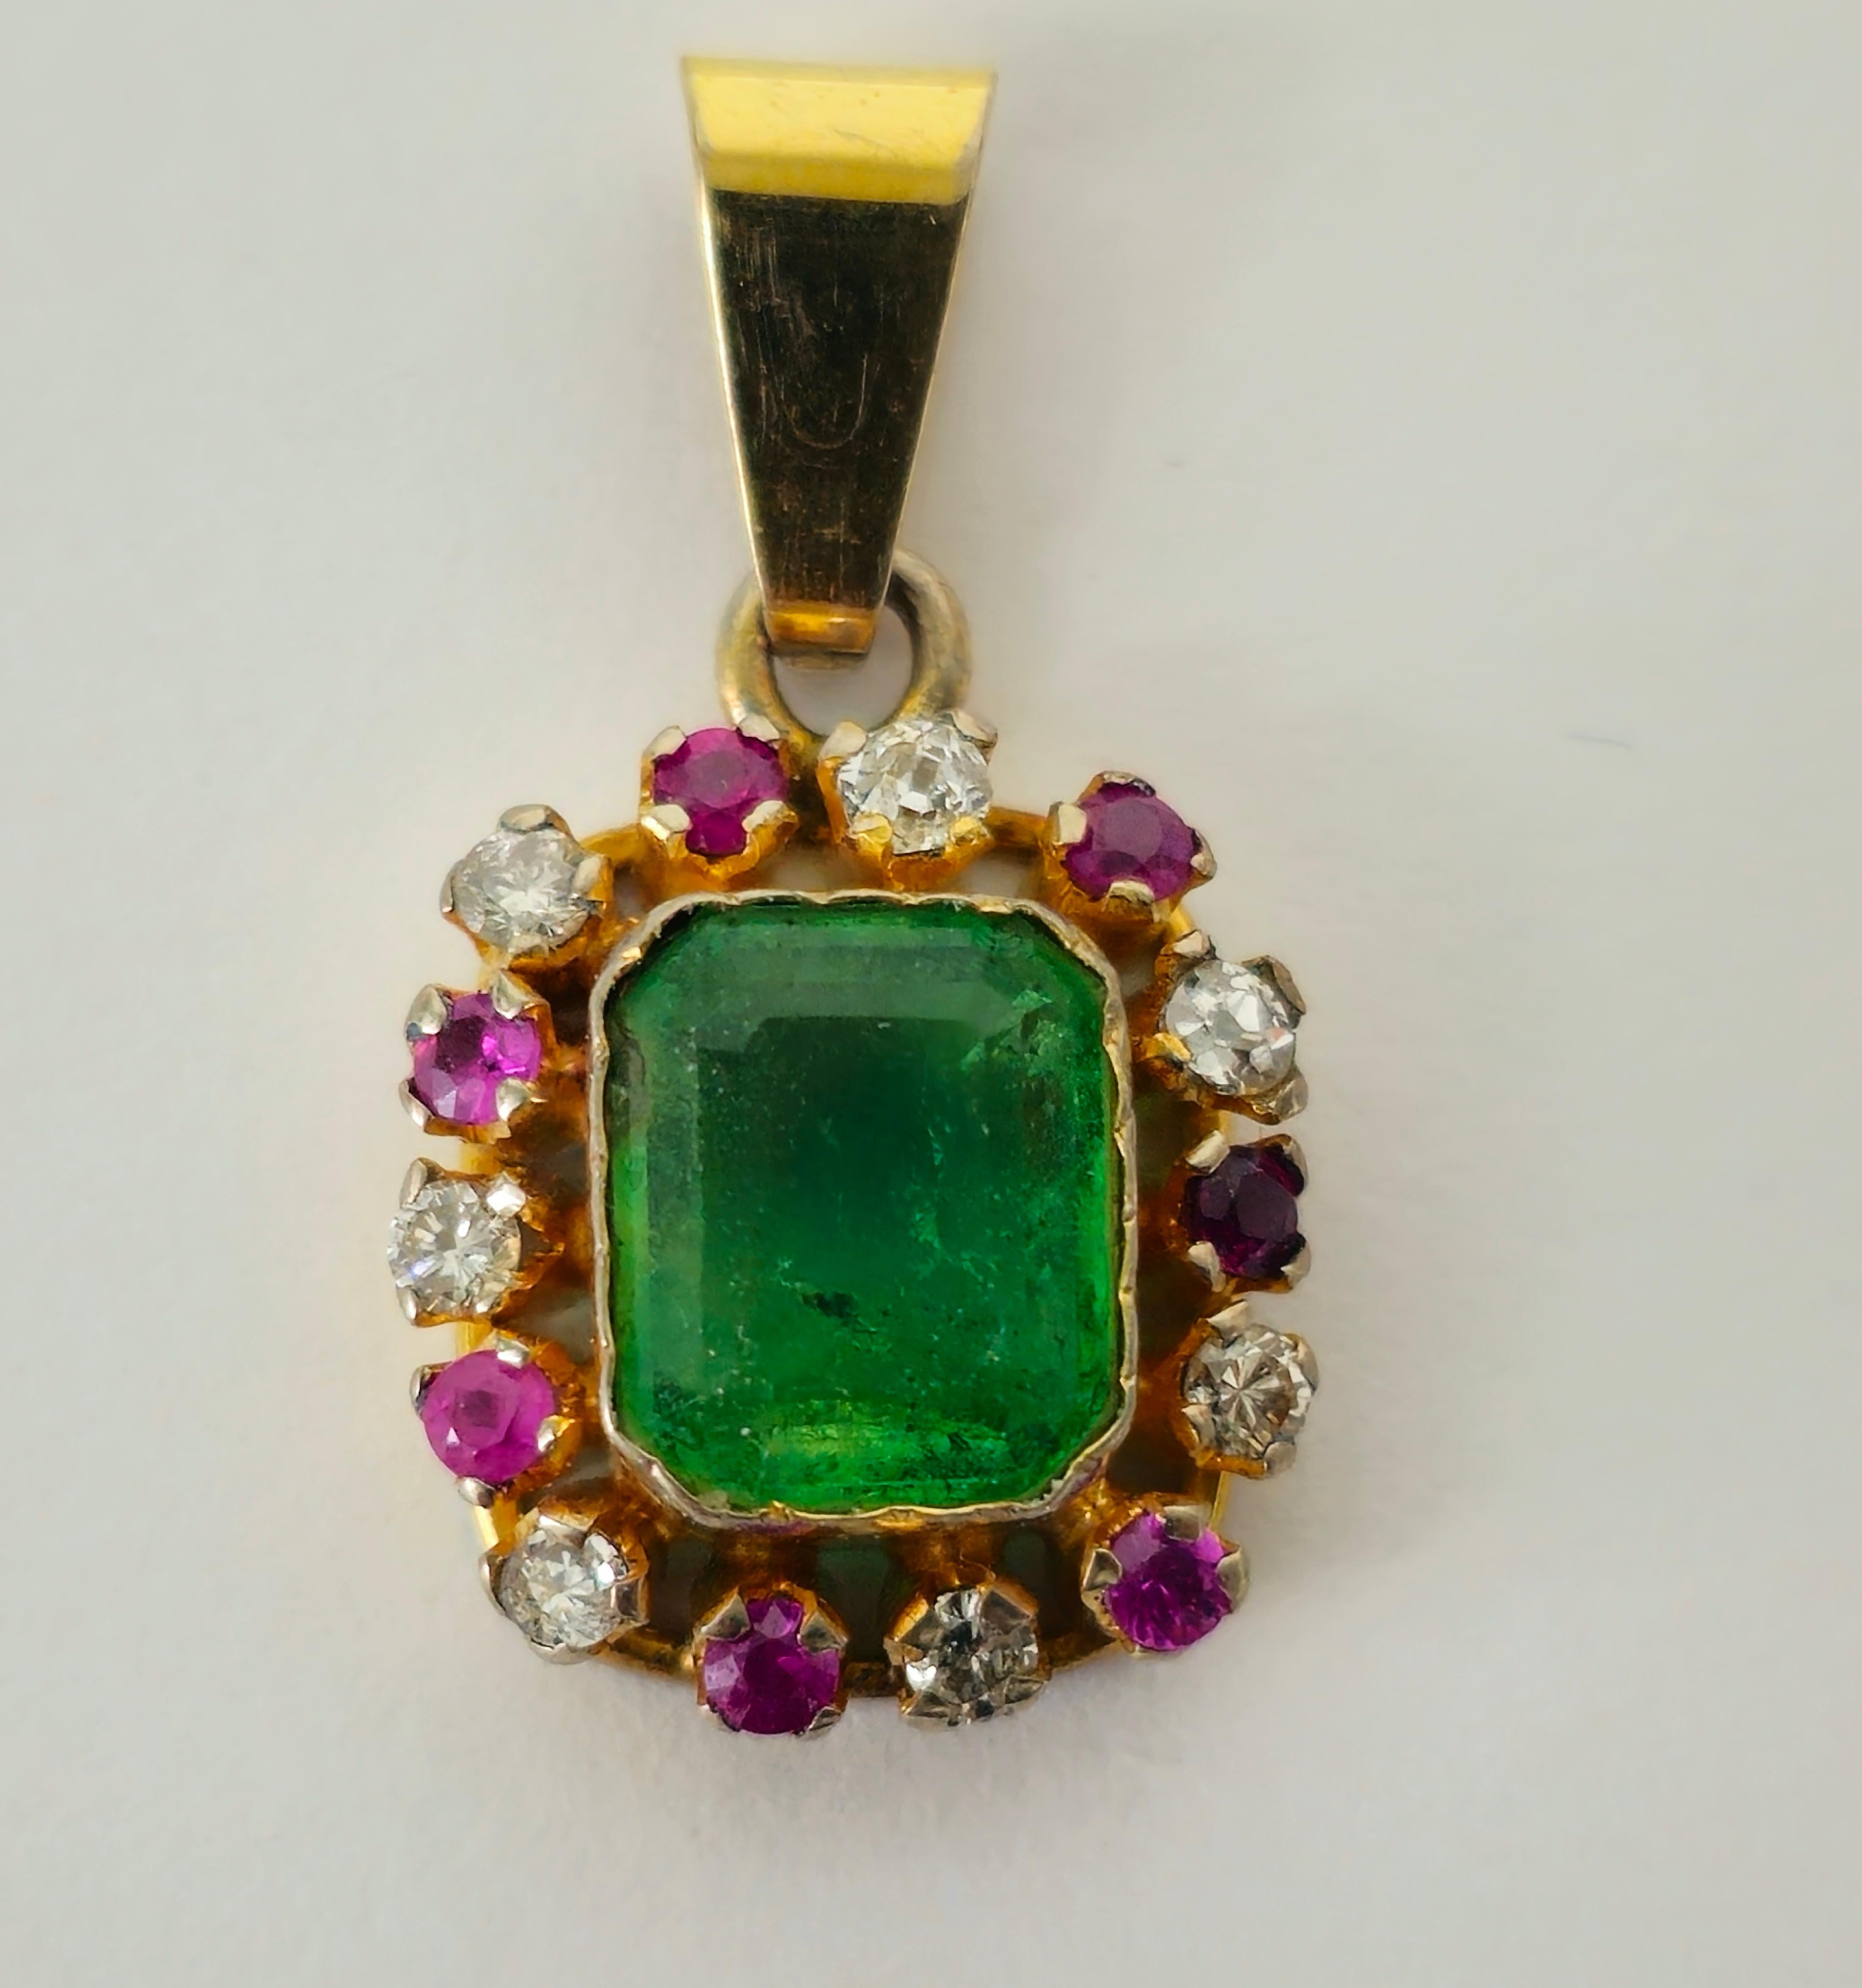 Fashioned from radiant 18K yellow gold, this exquisite pendant showcases a dazzling array of gemstones, including a 0.20 carat diamond, SI clarity, and G color, alongside a 0.30 carat Burma ruby and a striking 2.50 carat emerald. With a total carat